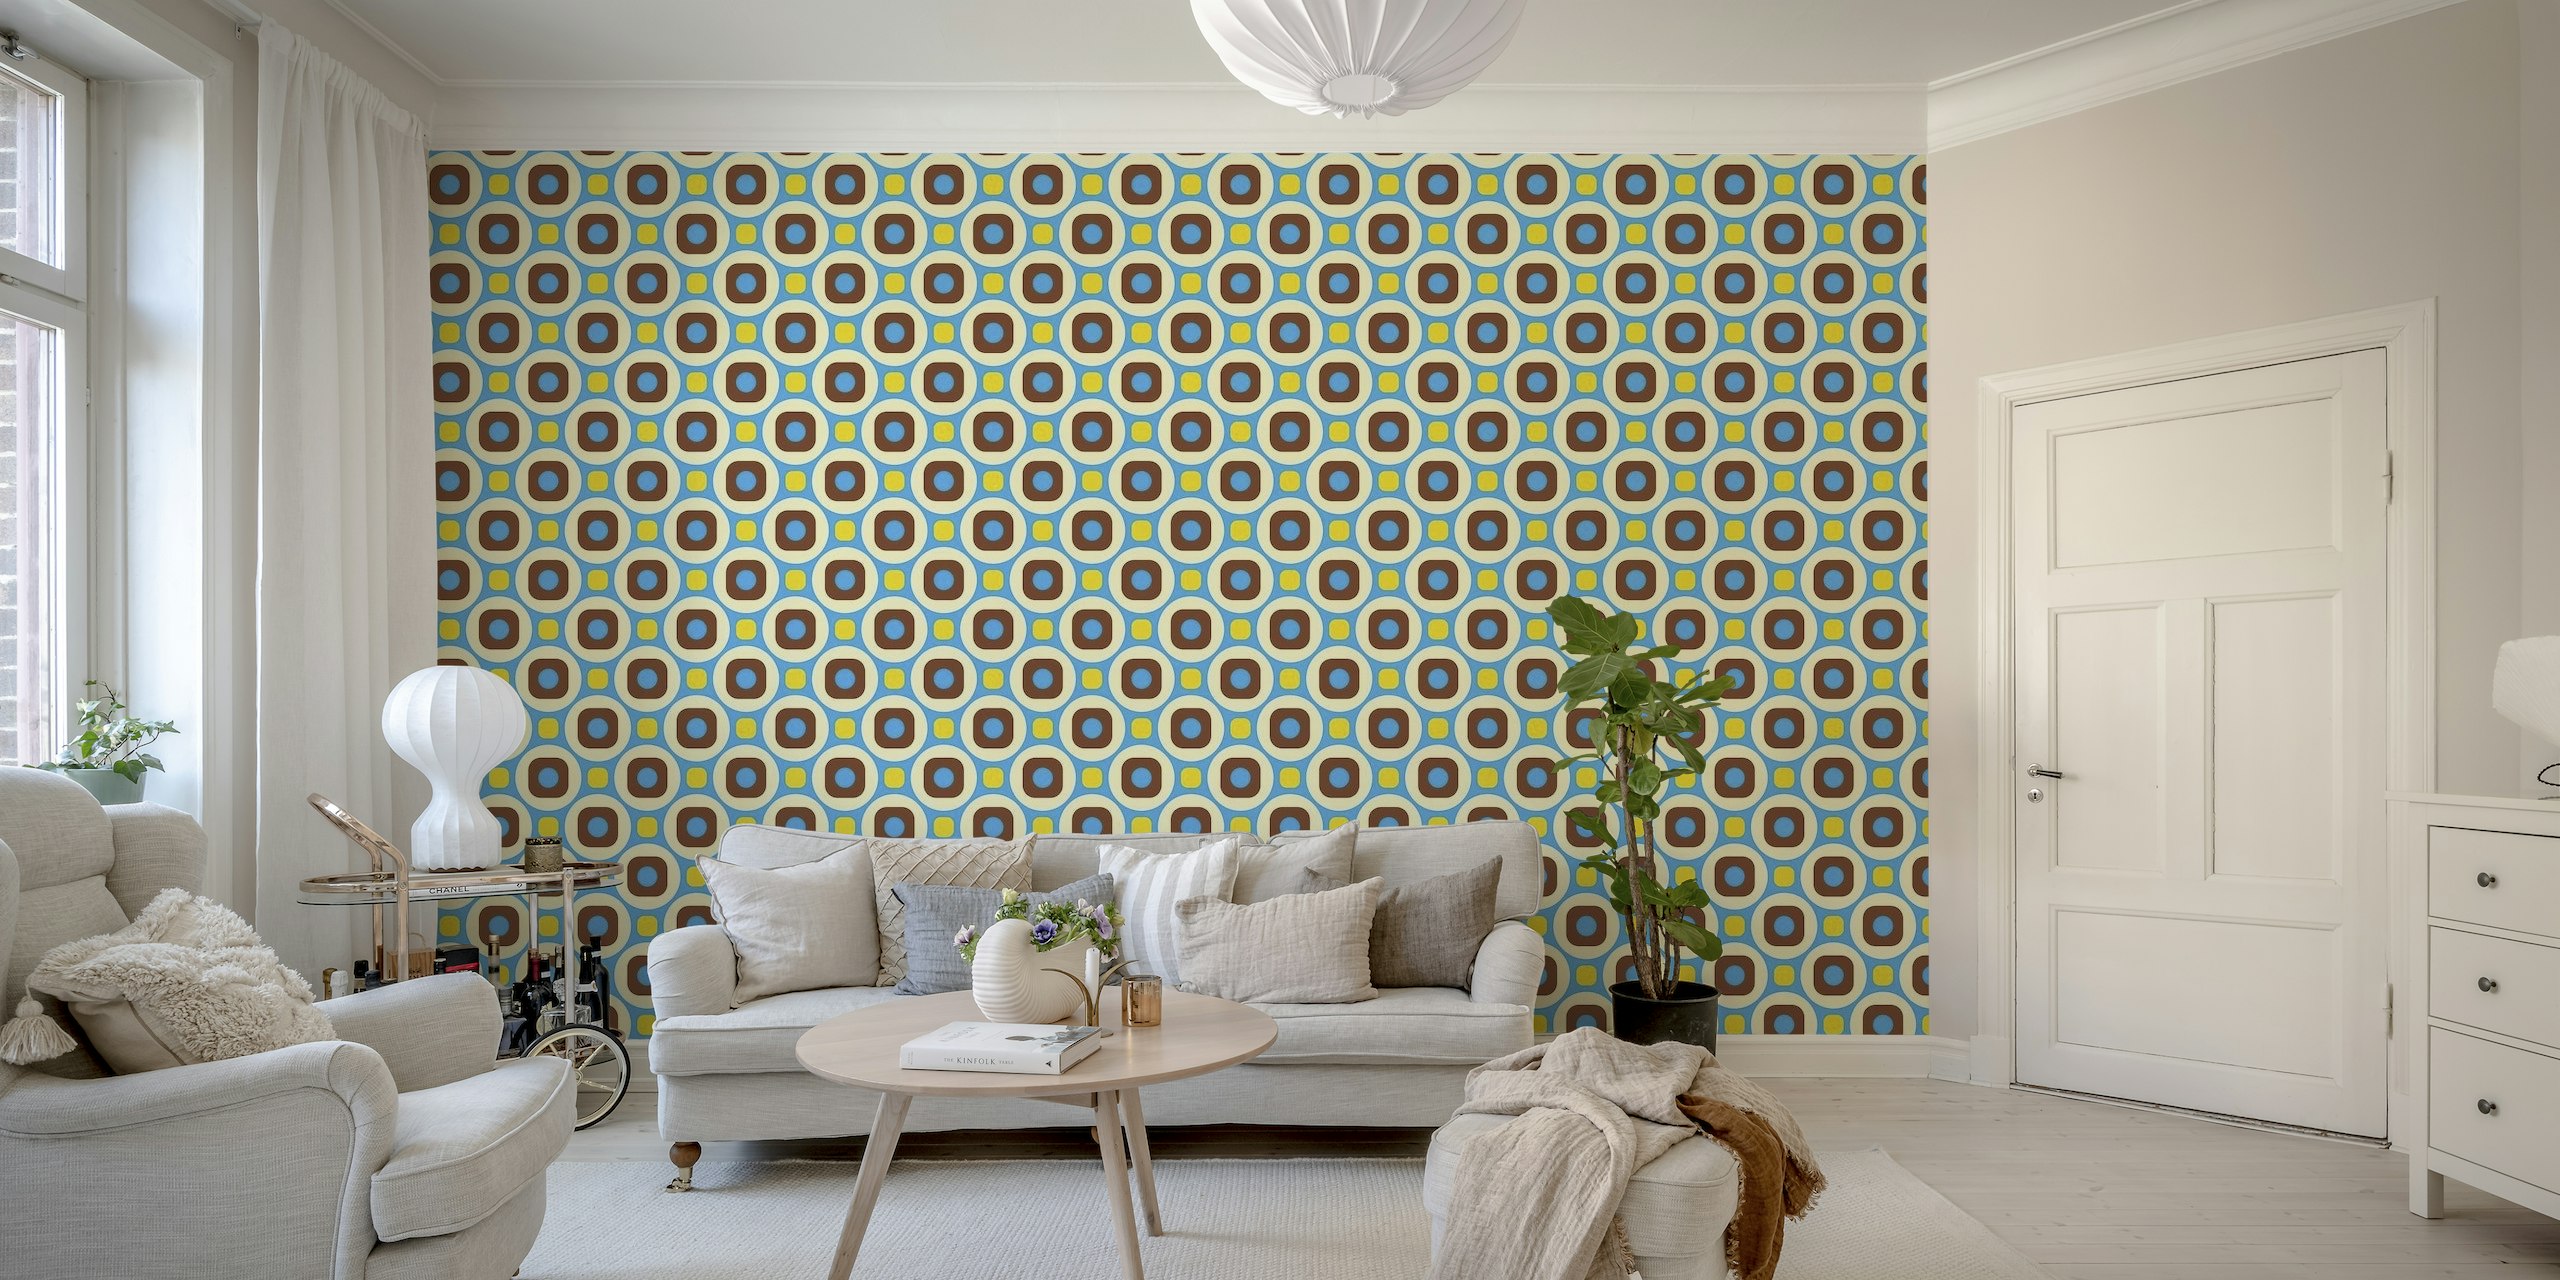 Retro geometric pattern wall mural with blue, yellow, and brown shapes on a white background